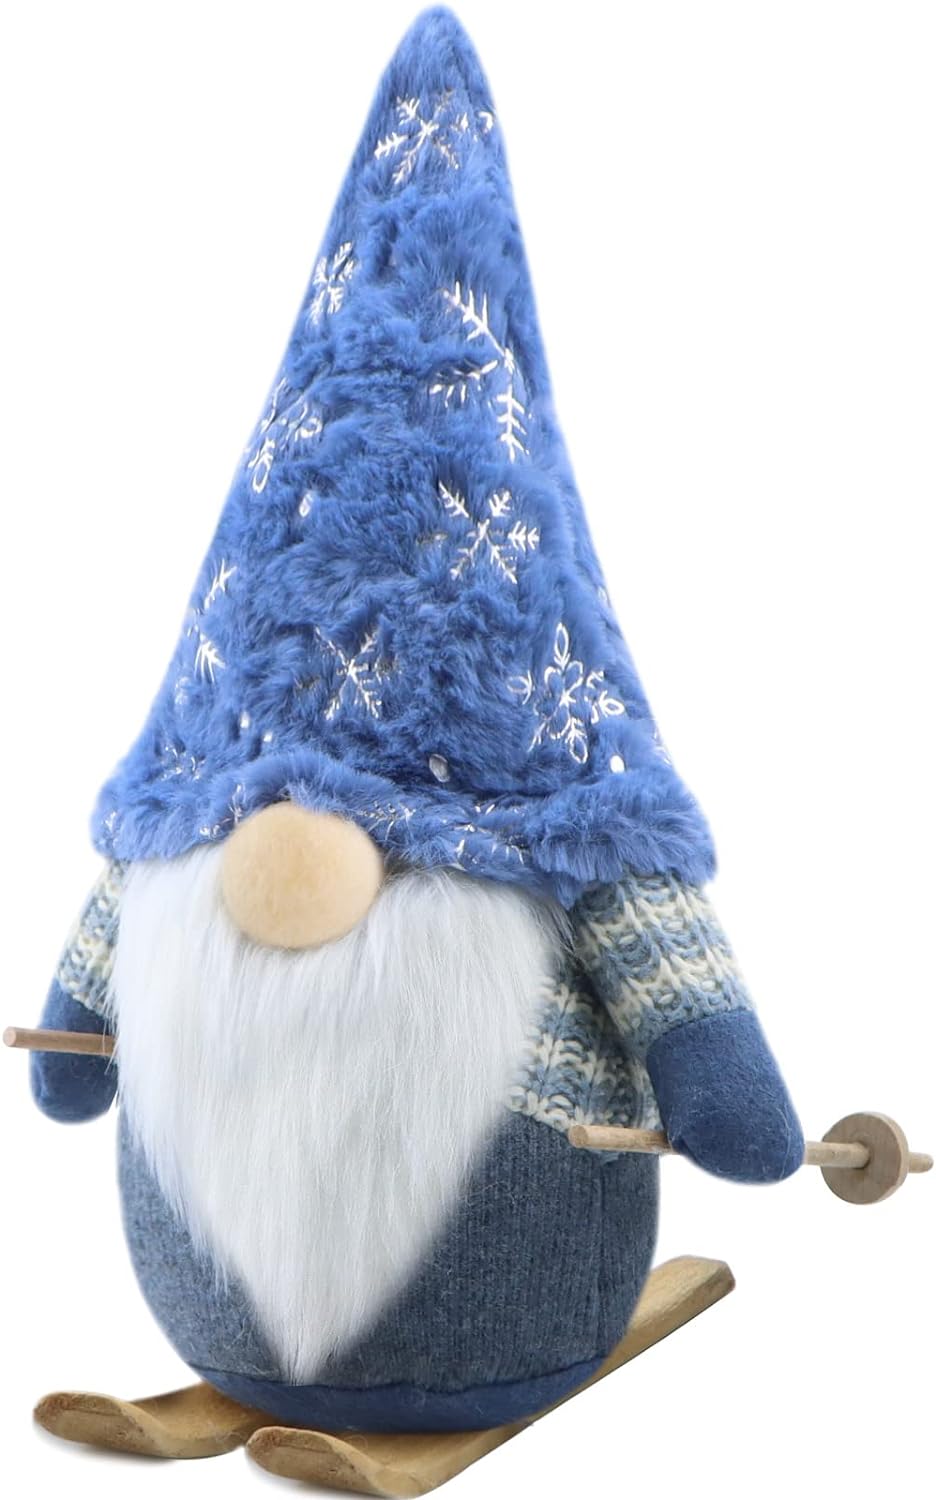 Godeufe Christmas Gonk Decor Gnomes Gift Xmas Decoration with Sled for Home Kitchen Farmhouse Tiered Tray, Elf Dwarf Figurines Handmade Scandinavian Tomte 31 cm (Blue)